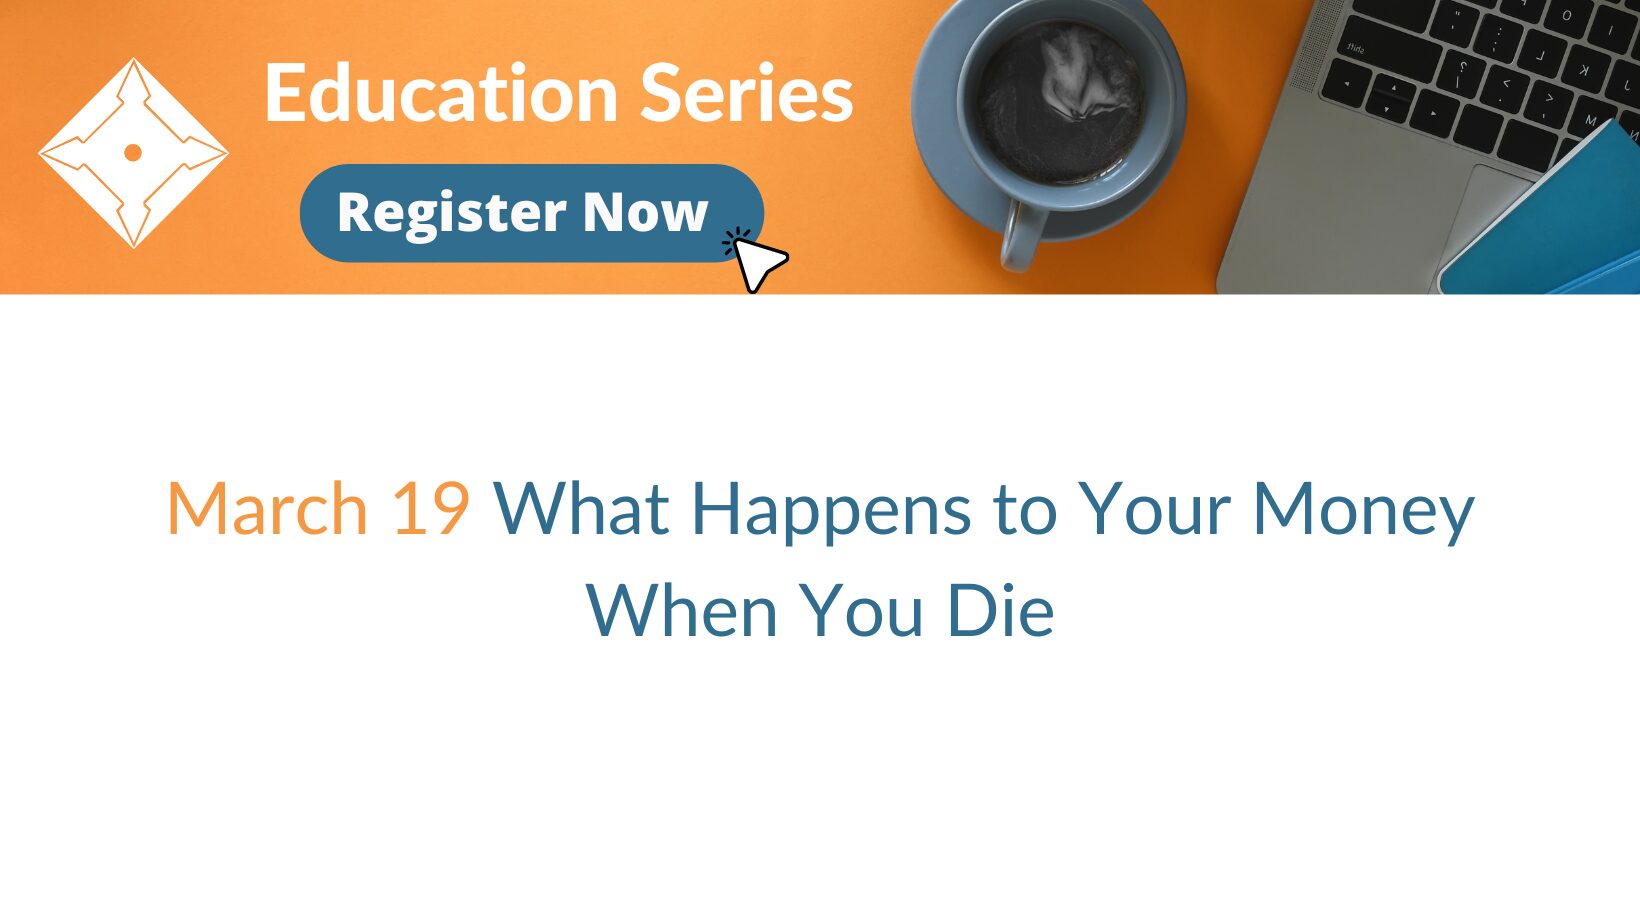 March 19 Webinar What Happens to Your Money When You Die